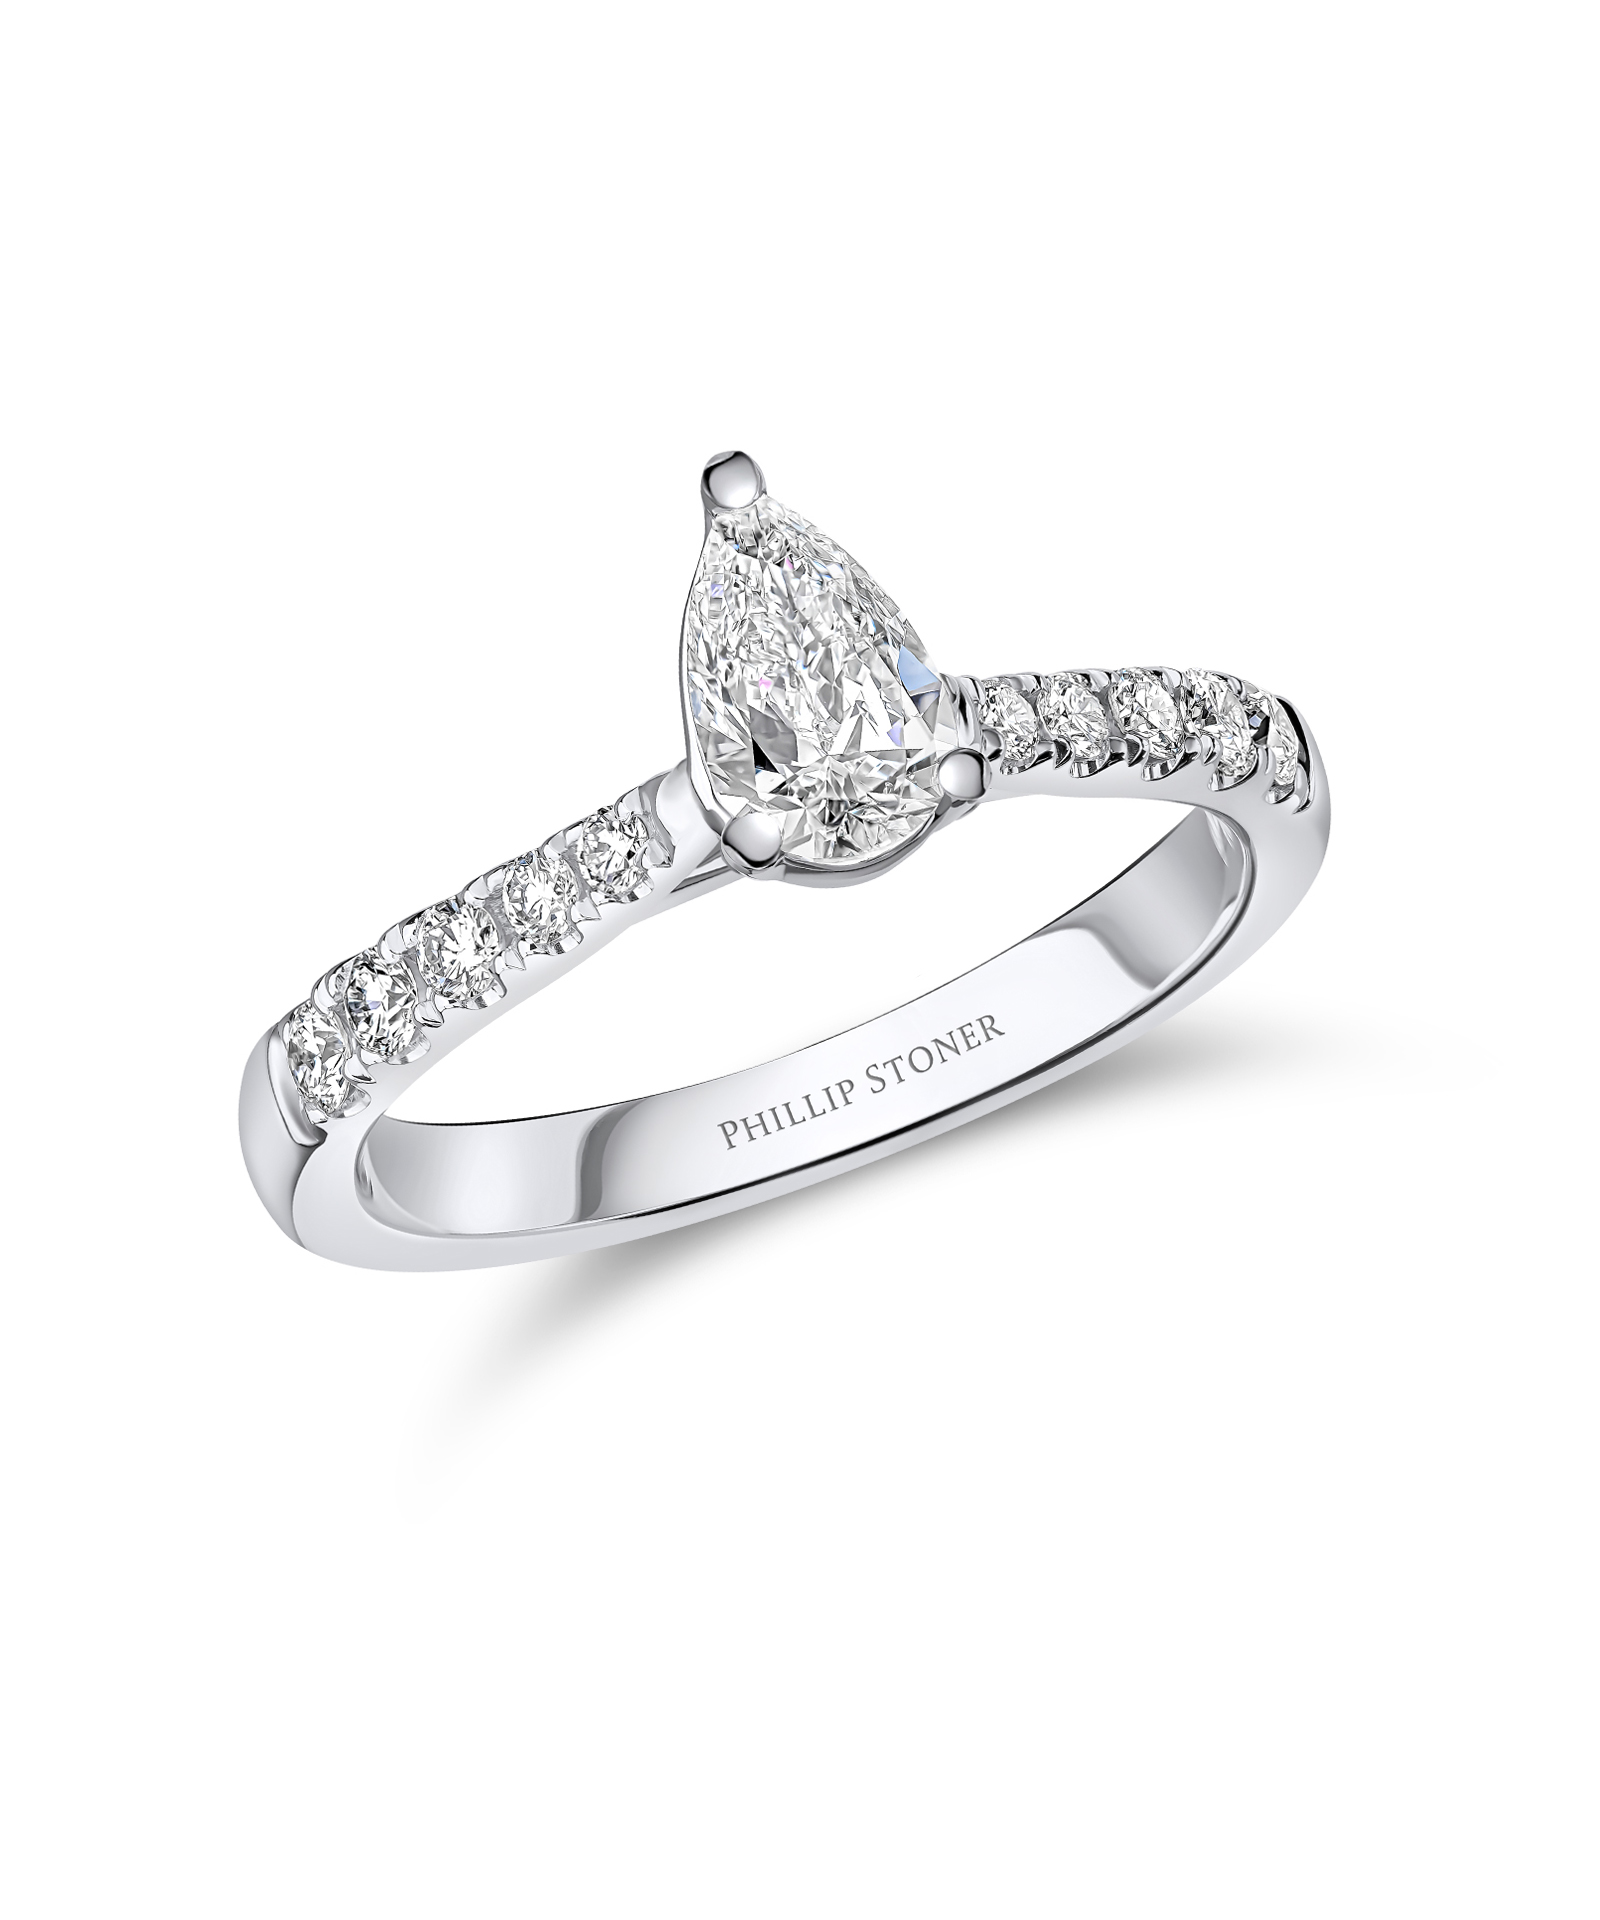 0.50ct Pear Cut Diamond Engagement Ring with Scallop Set Shoulders - Phillip Stoner The Jeweller